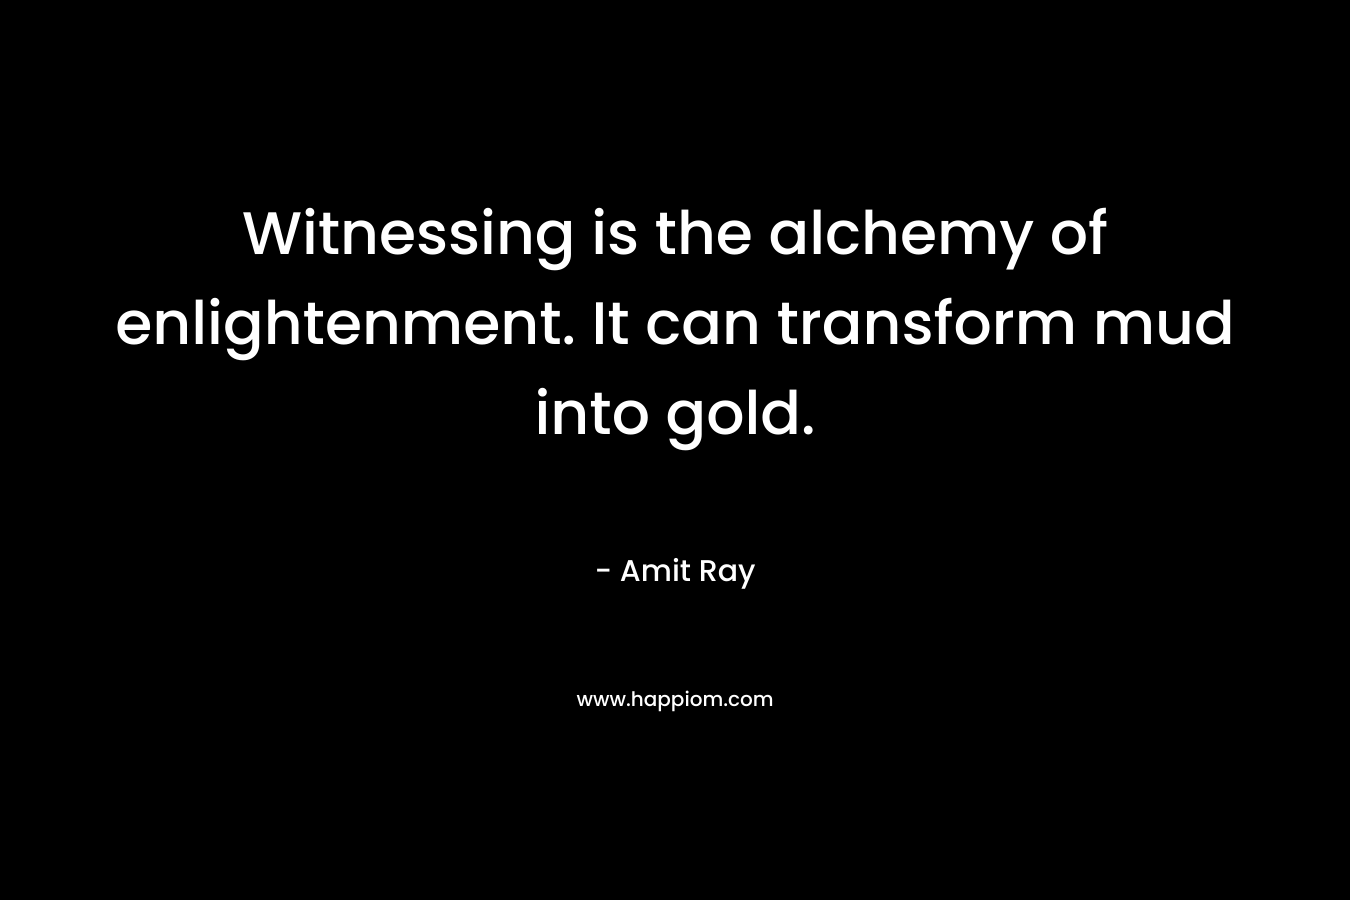 Witnessing is the alchemy of enlightenment. It can transform mud into gold. – Amit Ray